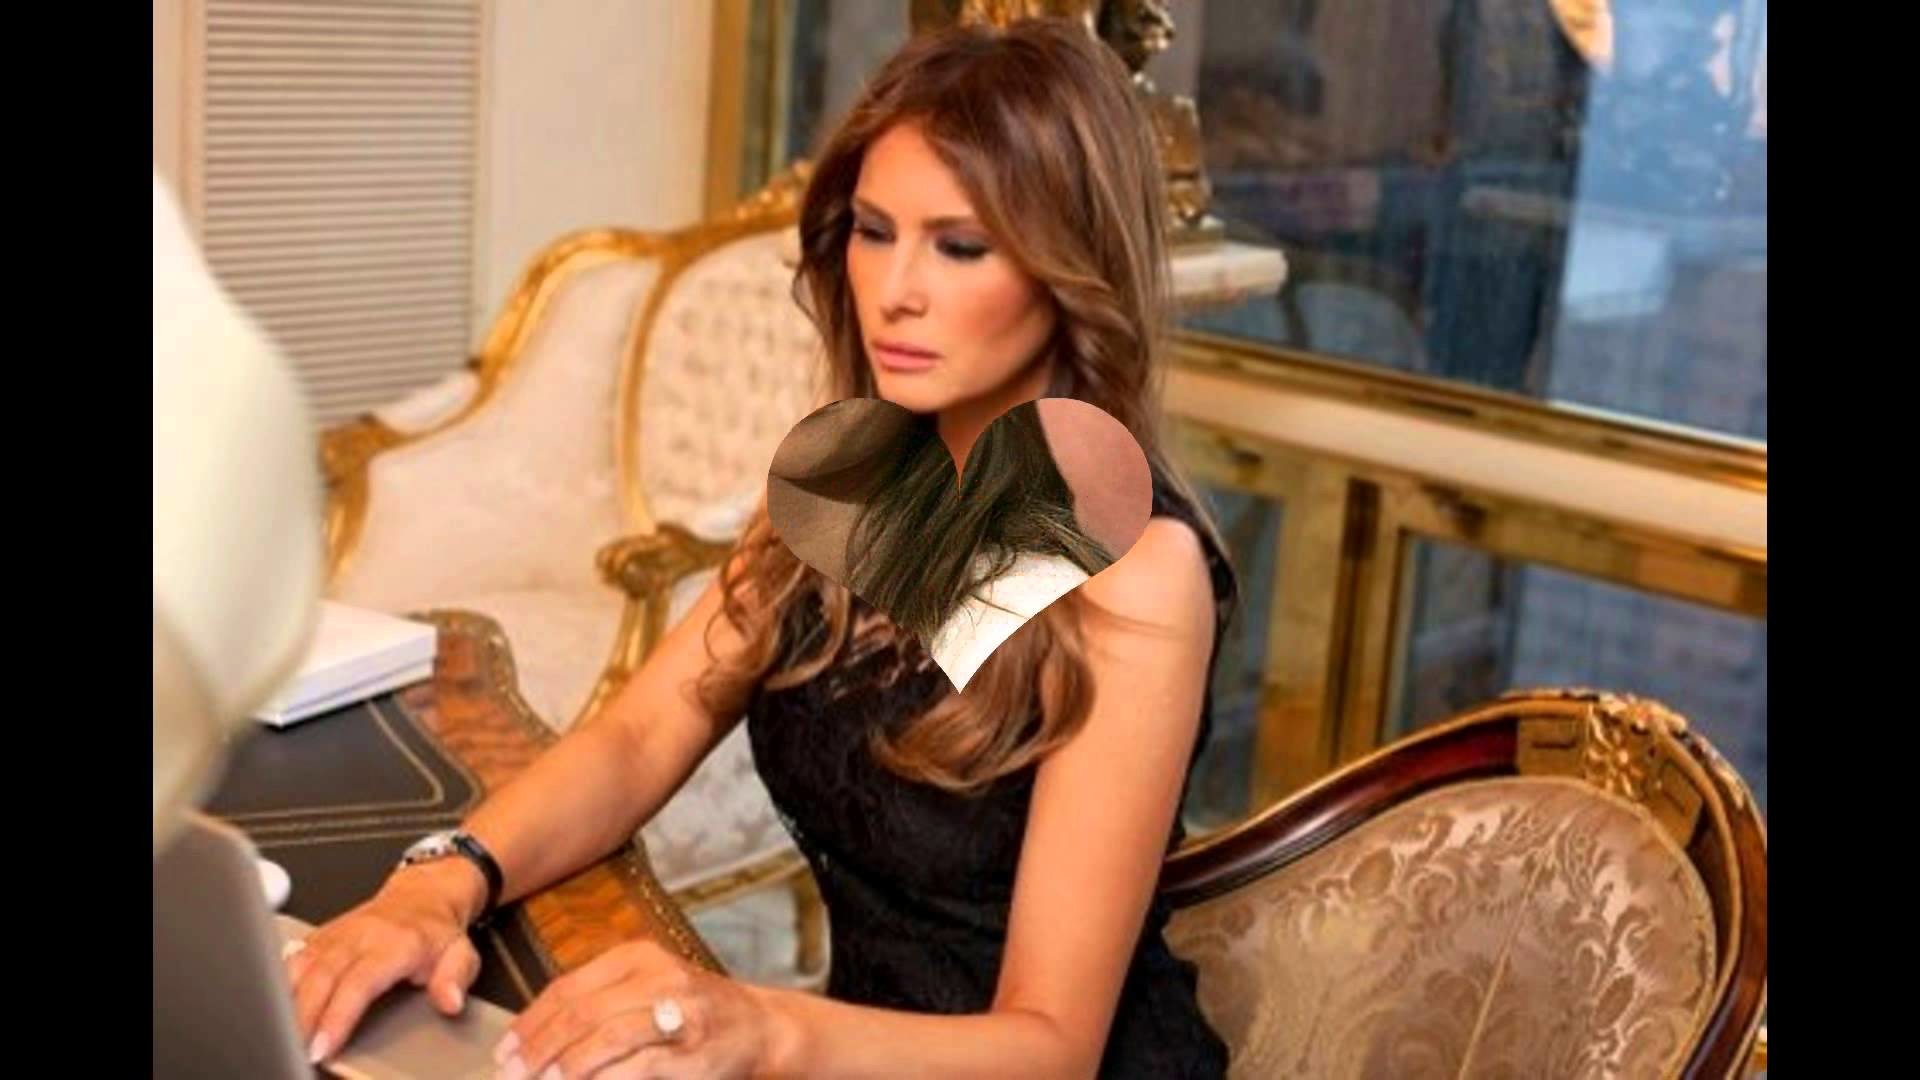 1920x1080 Donald Trump and Model Melania Trump Modeling Could Be Help Trump's Compaign